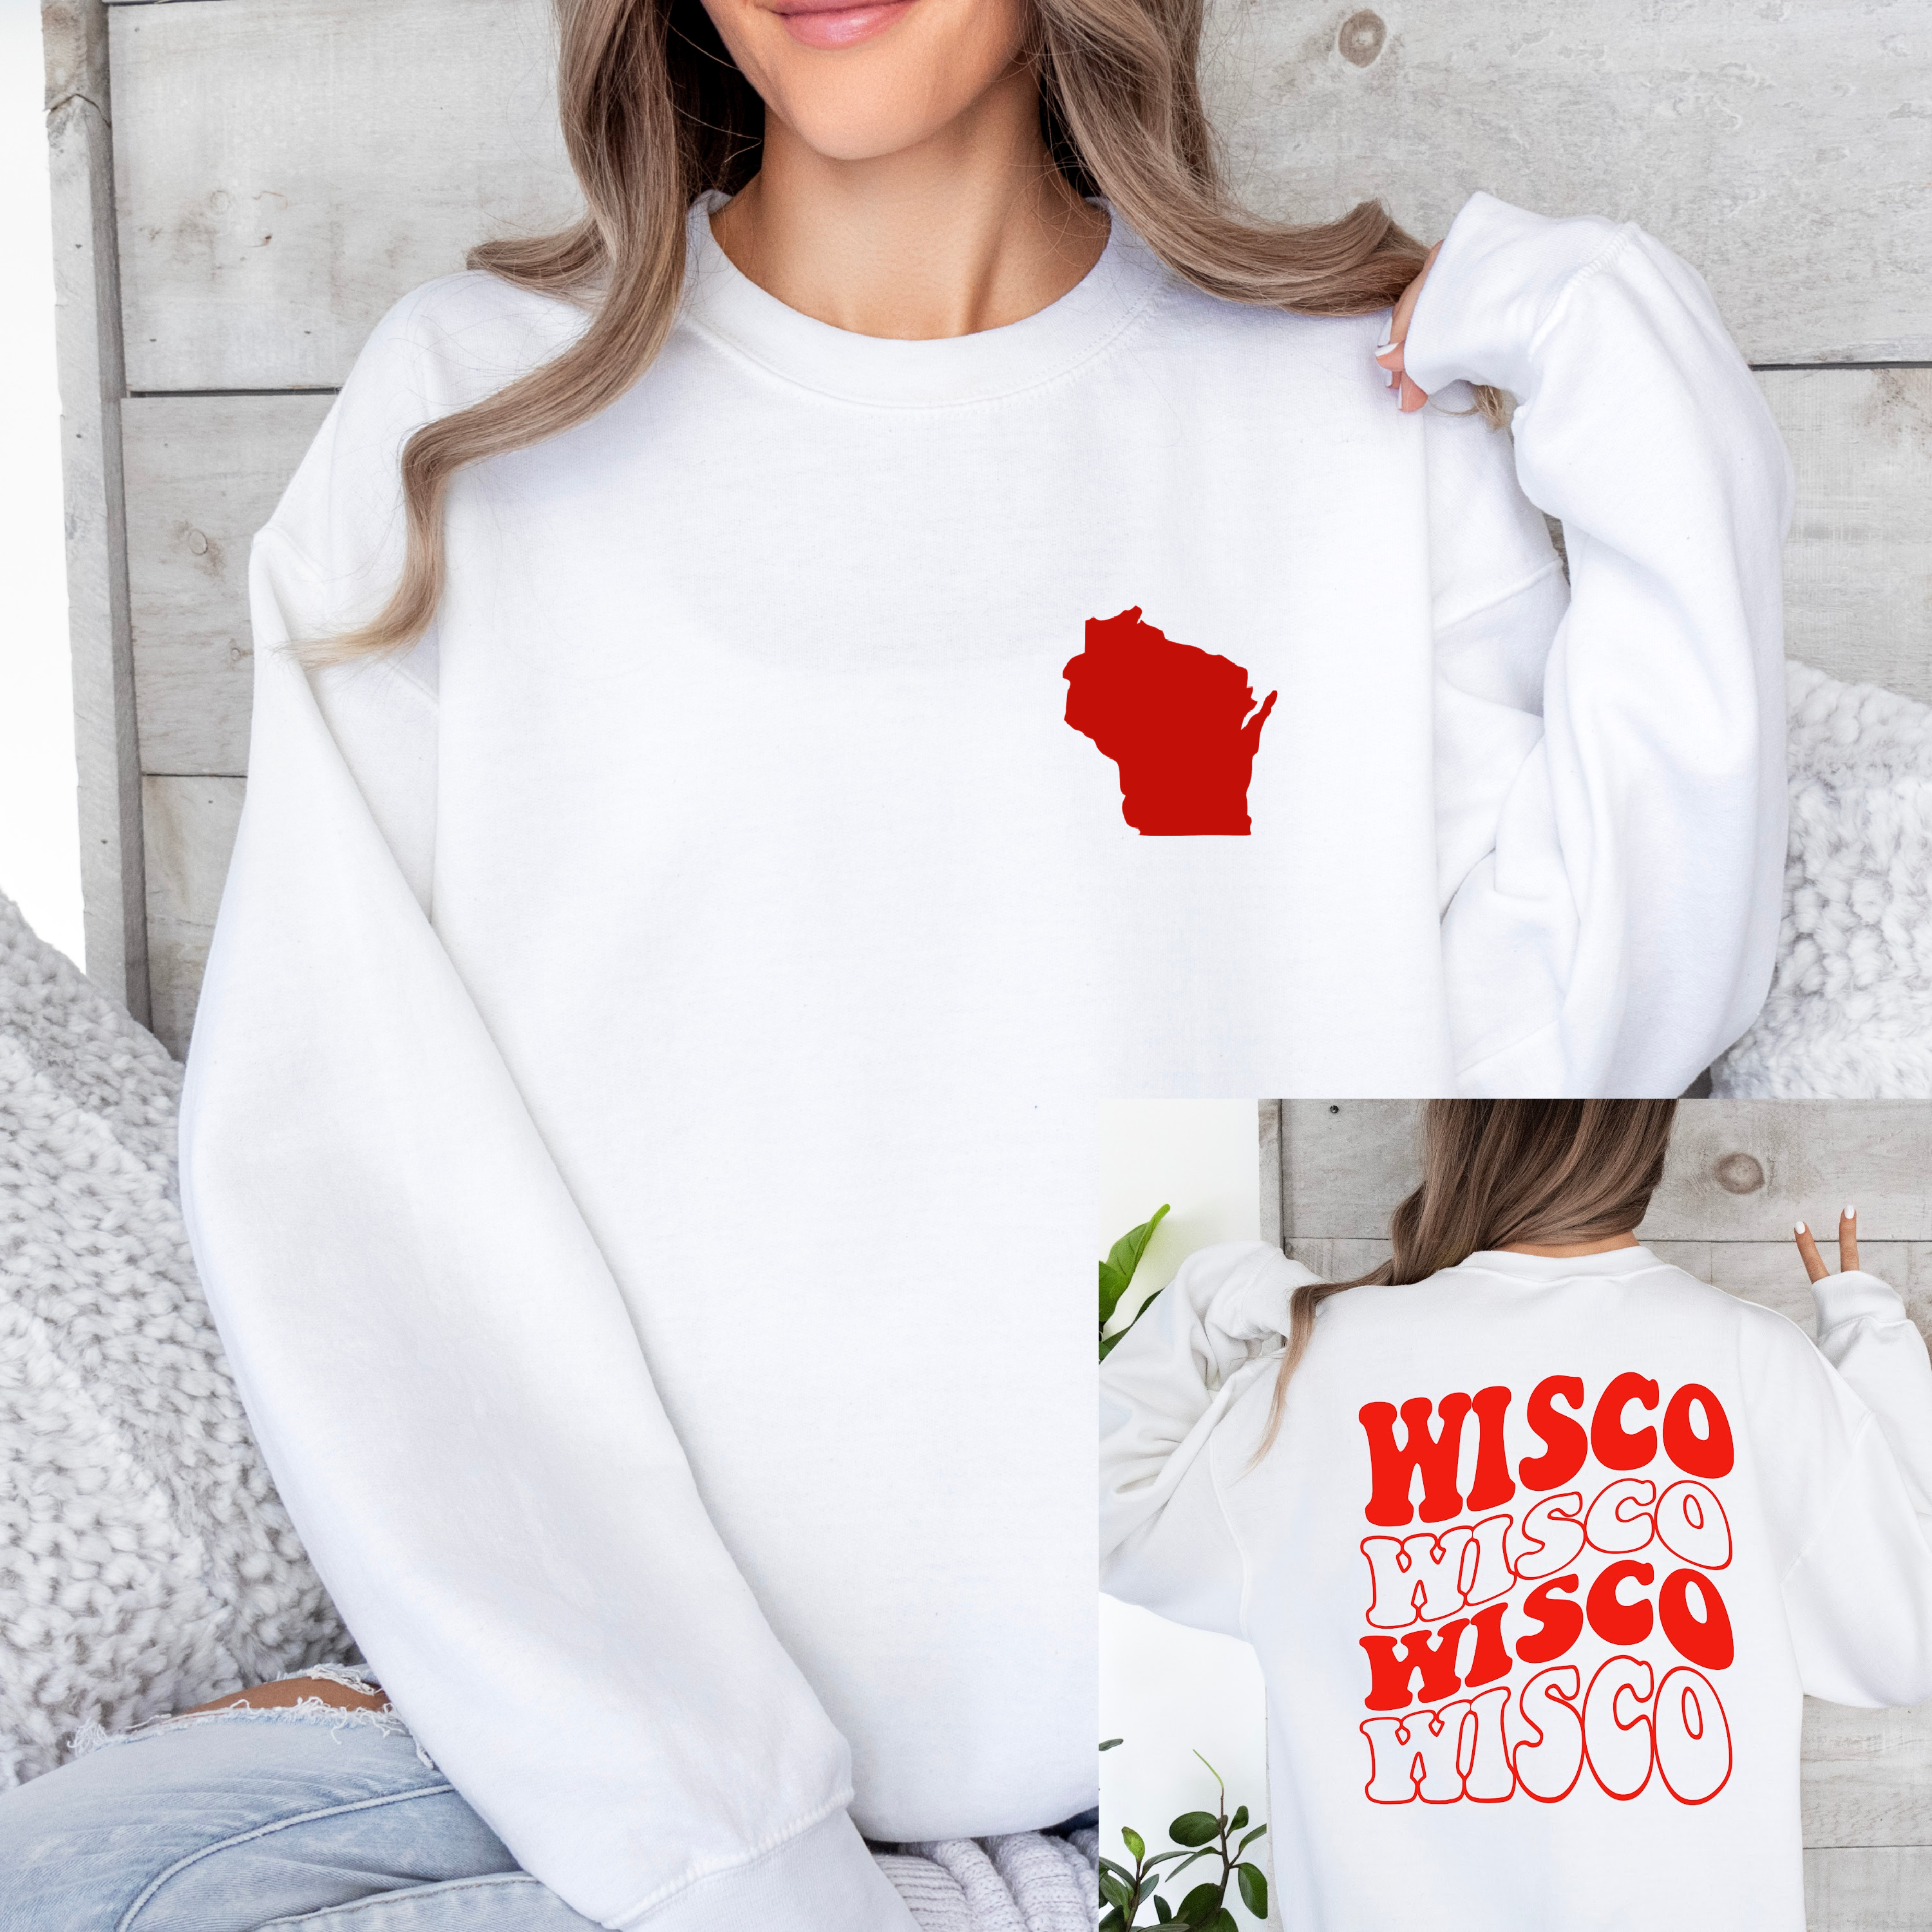 Wisco Crew Sweatshirt Front and Back in Red or White